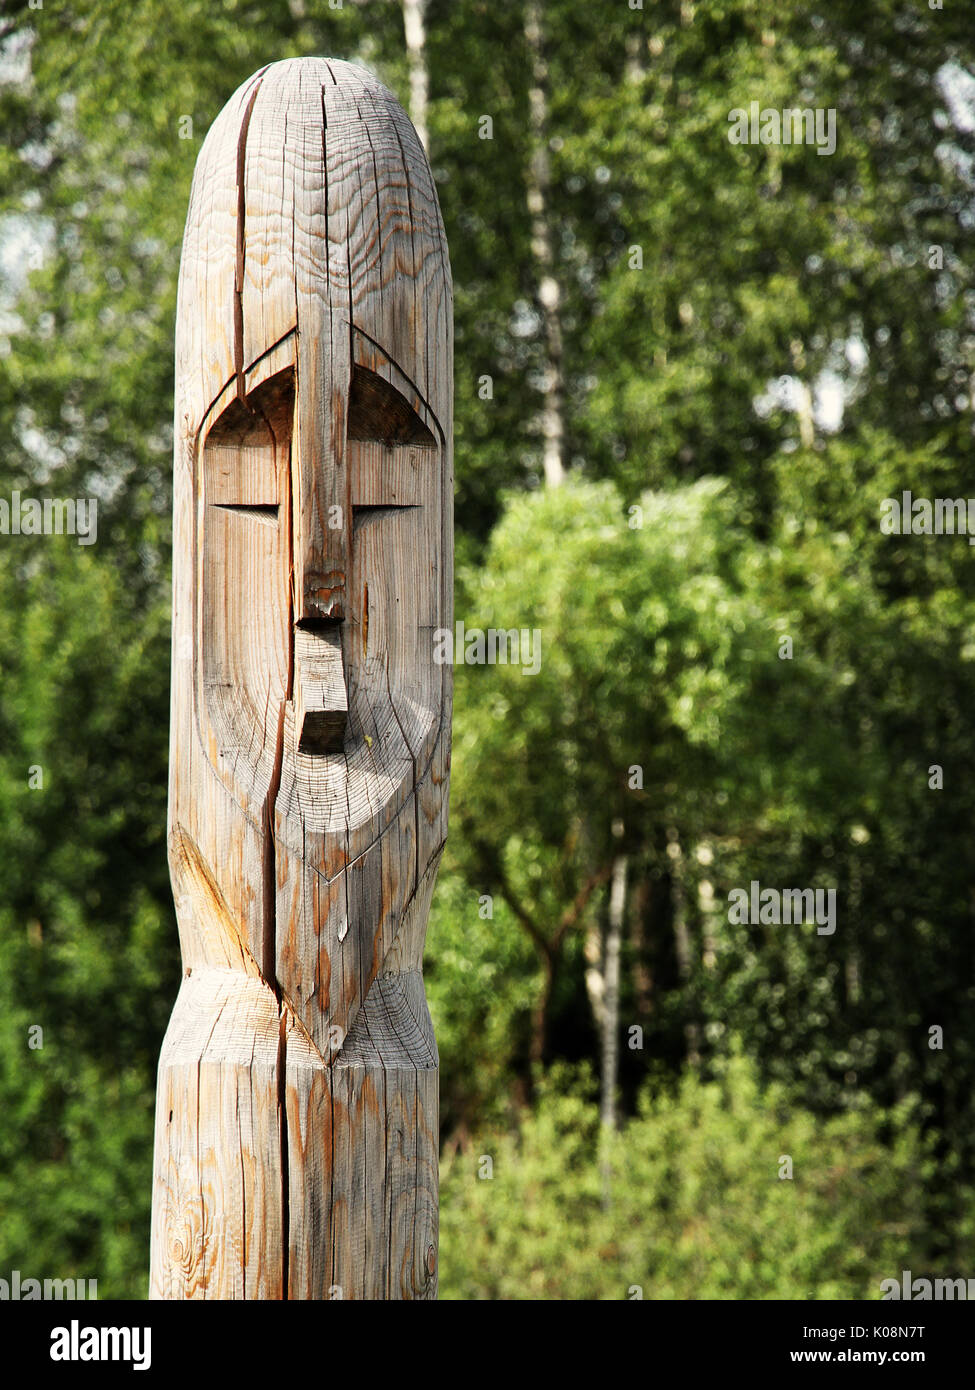 Wooden totem idol pole with a forest as a background Stock Photo - Alamy